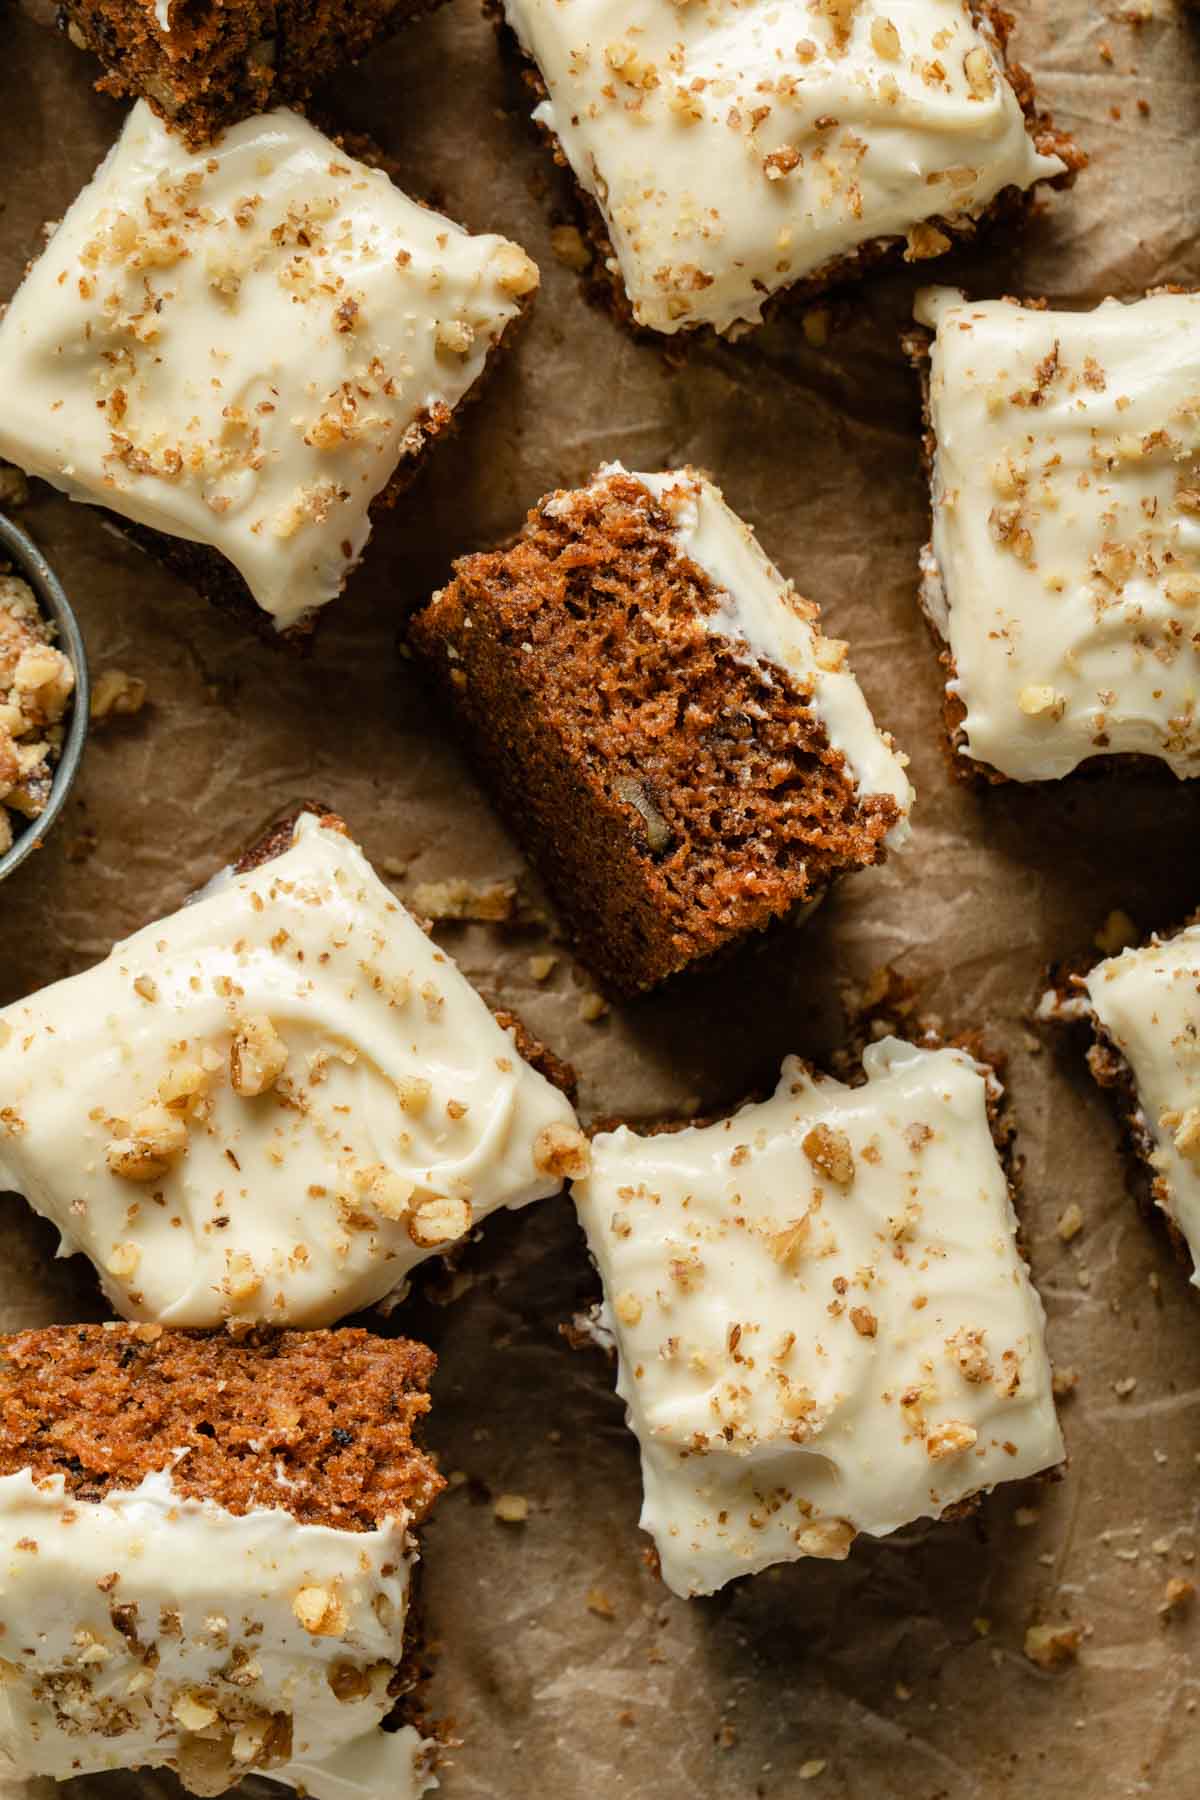 Carrot cake cut into squares and arranged on a sheet of parchment paper.